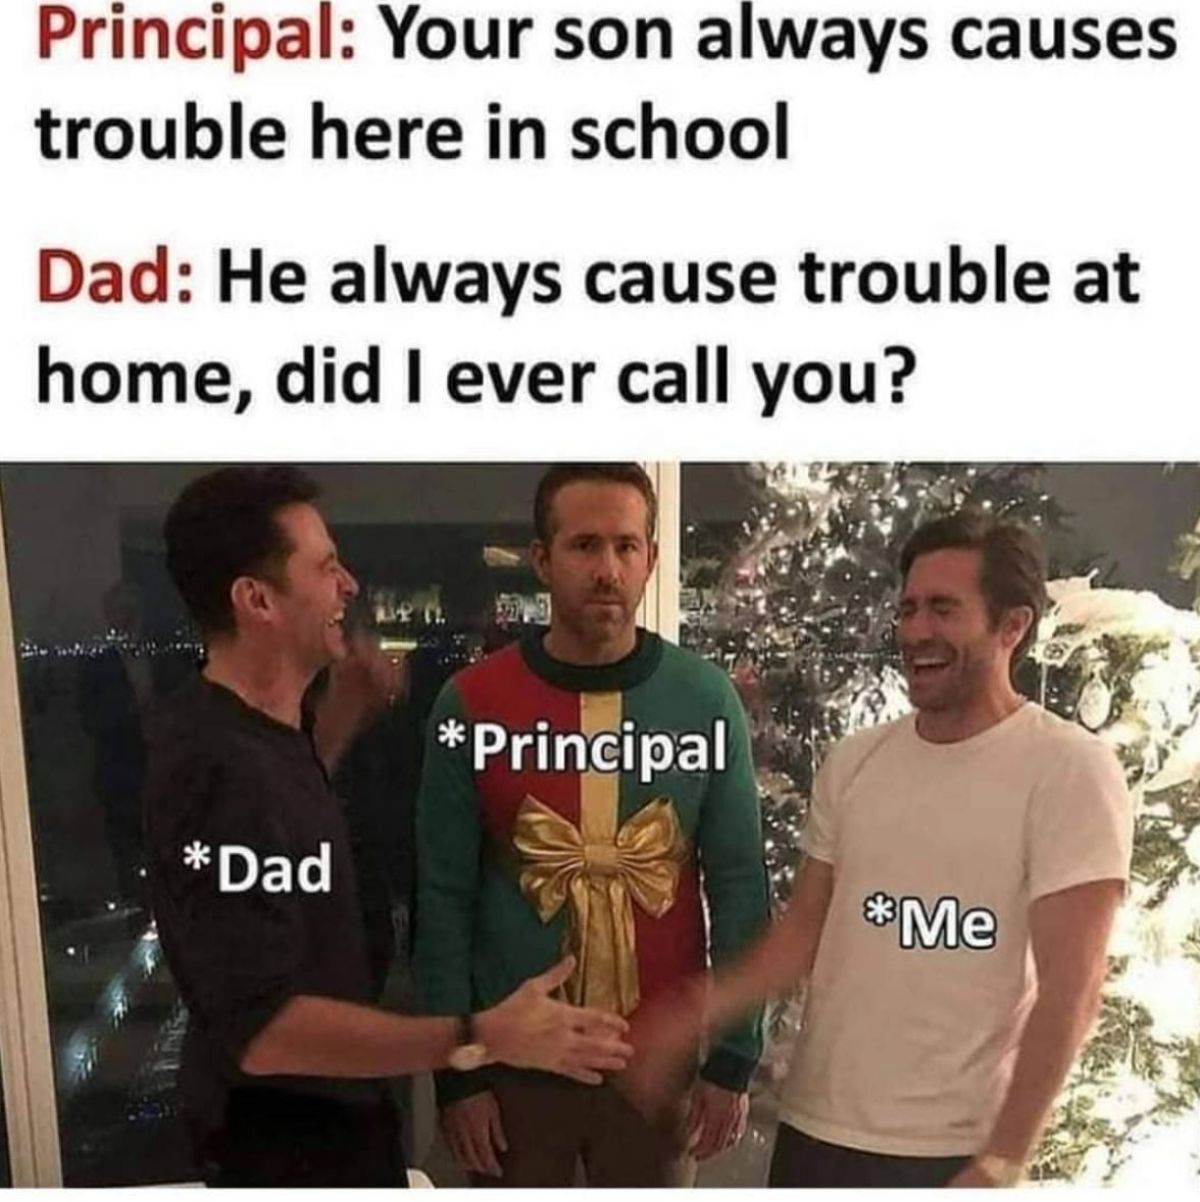 jake gyllenhaal hugh jackman ryan reynolds - Principal Your son always causes trouble here in school Dad He always cause trouble at home, did I ever call you? Dad Principal Me